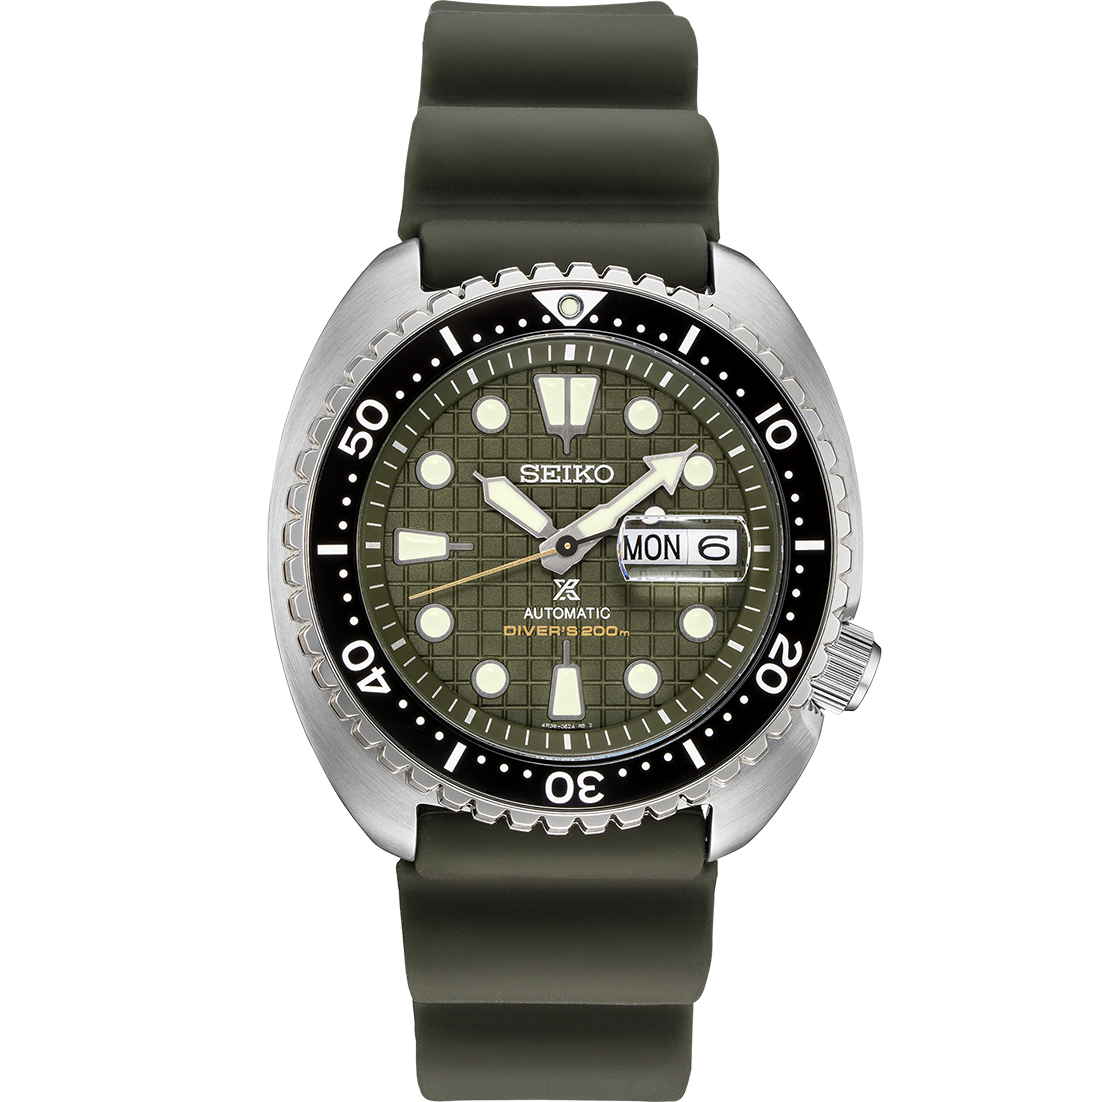 Seiko-SRPE05-Prospex-Green-Dial-45mm-Steel-Rubber-Diver-Automatic-Mens-Watch-134105479814